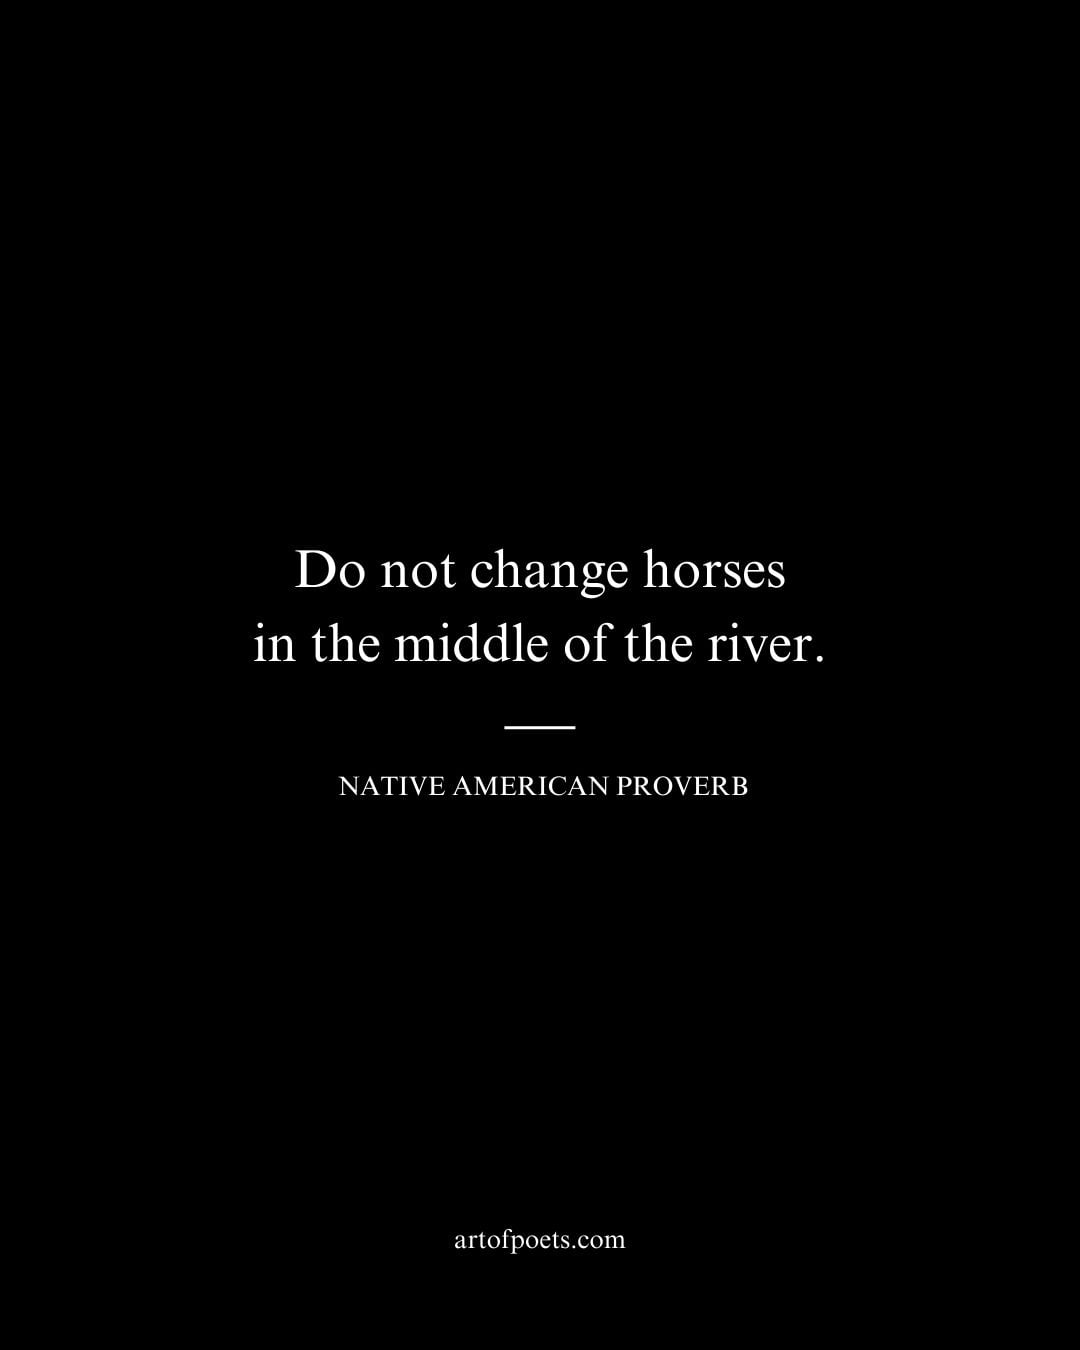 Do not change horses in the middle of the river. – Native American Proverb